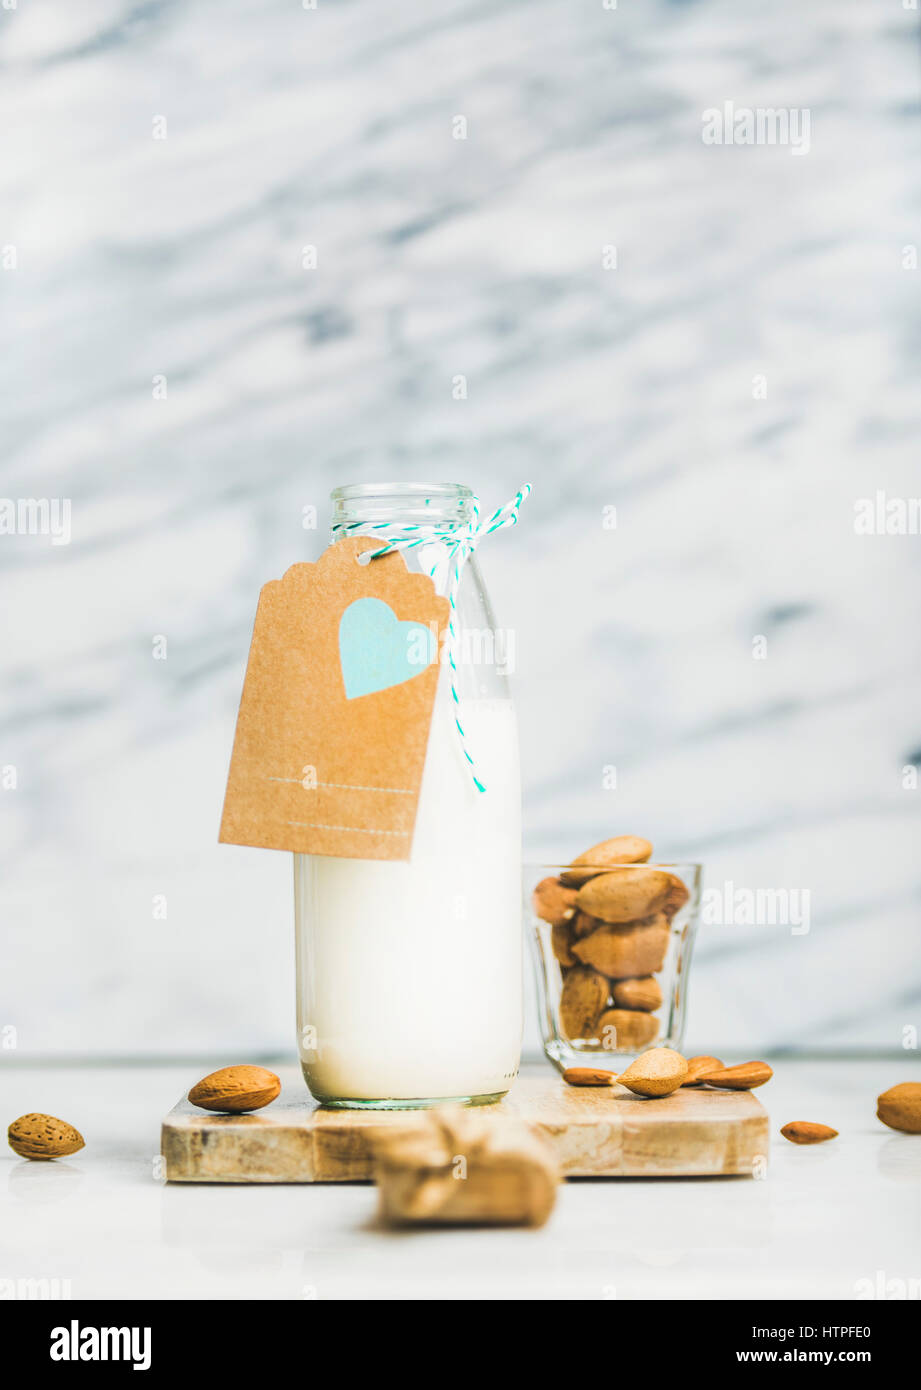 Fresh vegan dairy-free almond milk in glass bottle with craft paper label with copy space, grey marble background, selective focus. Vegan, vegetarian, Stock Photo